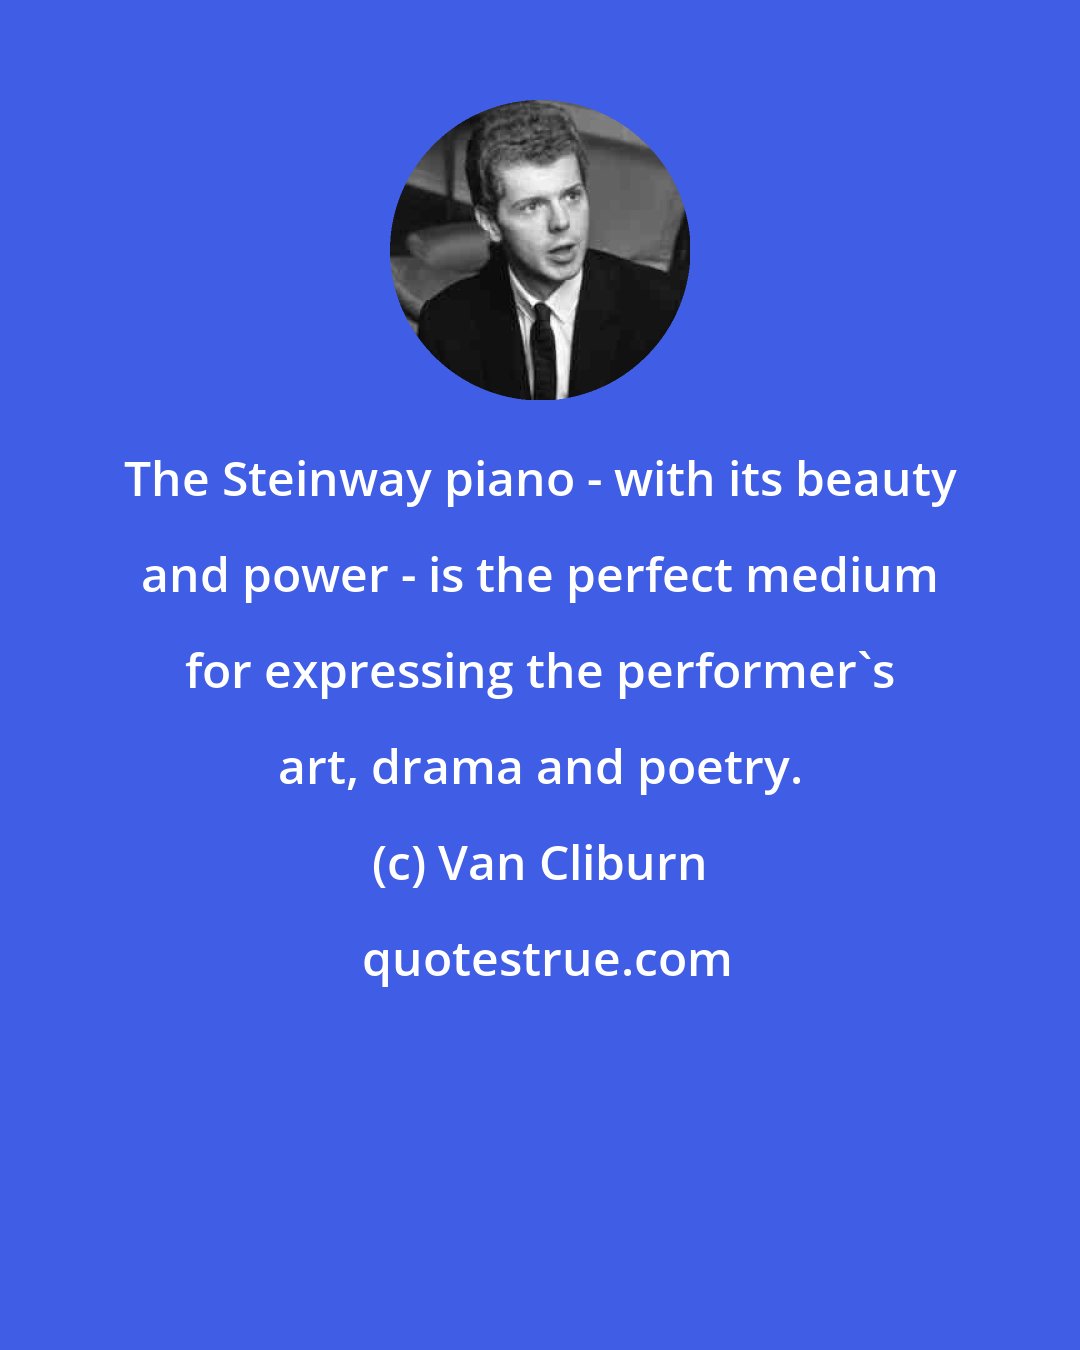 Van Cliburn: The Steinway piano - with its beauty and power - is the perfect medium for expressing the performer's art, drama and poetry.